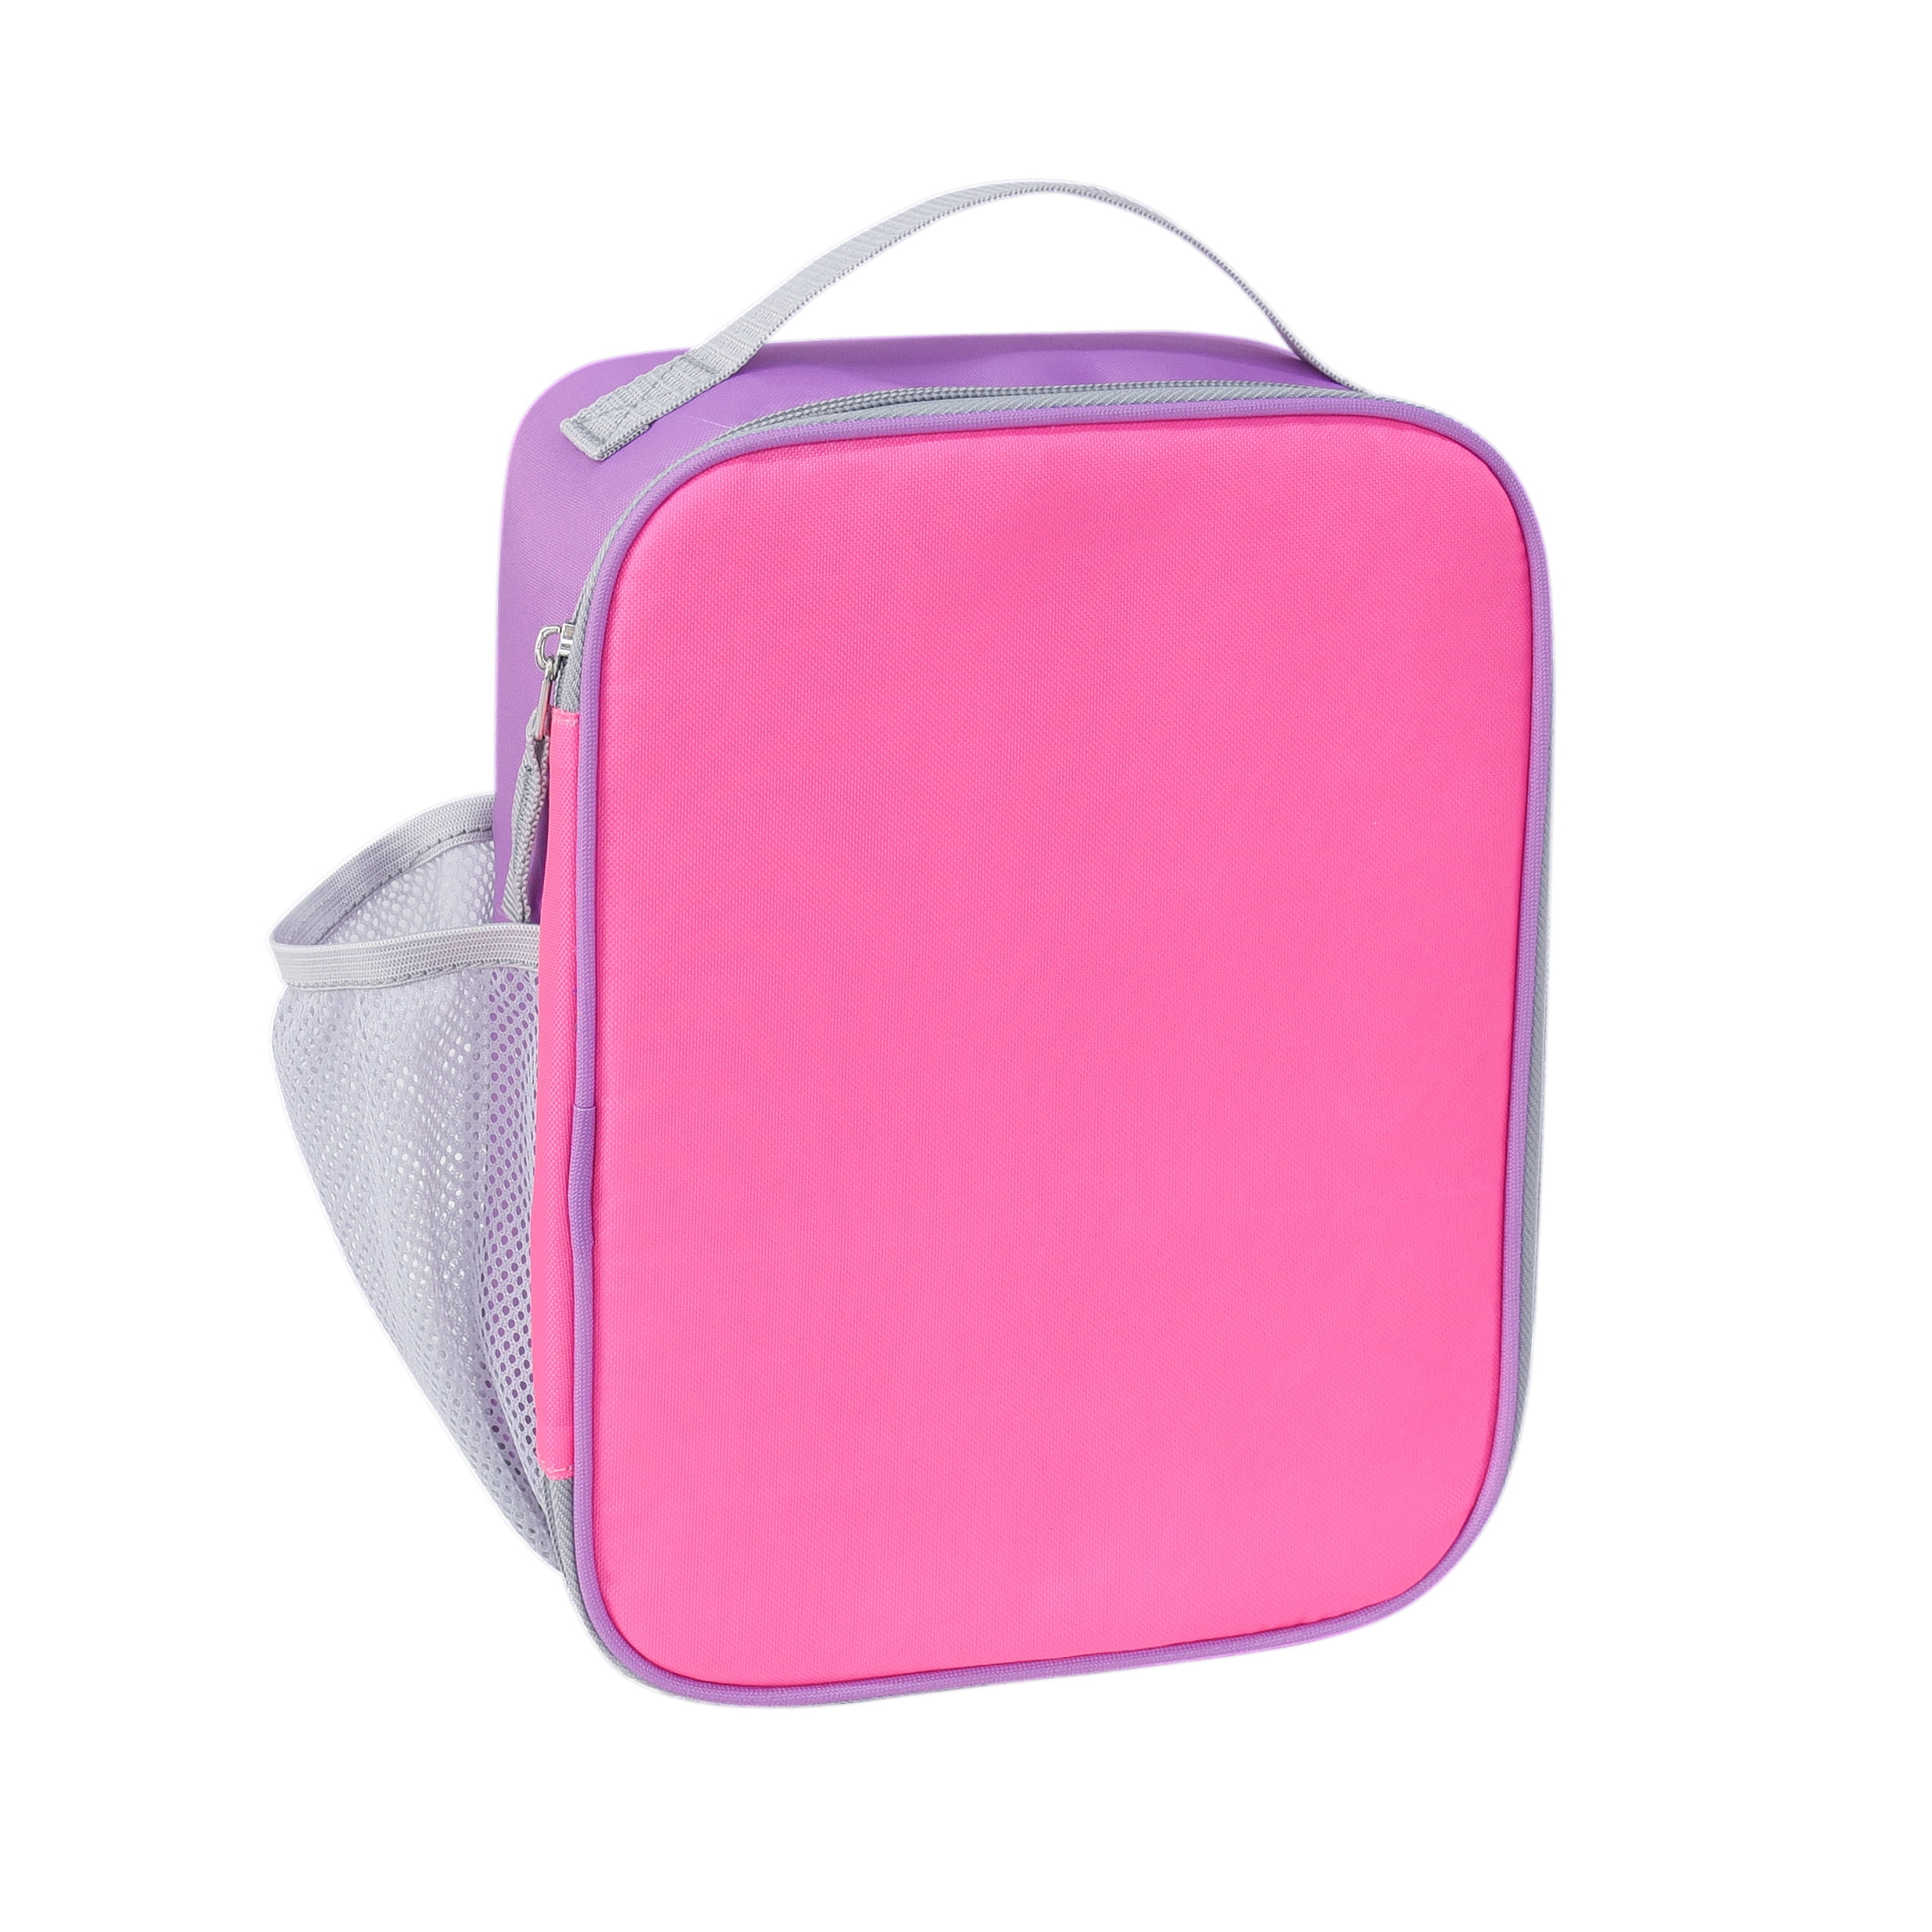 30 Fun & Functional Lunch Box Accessories